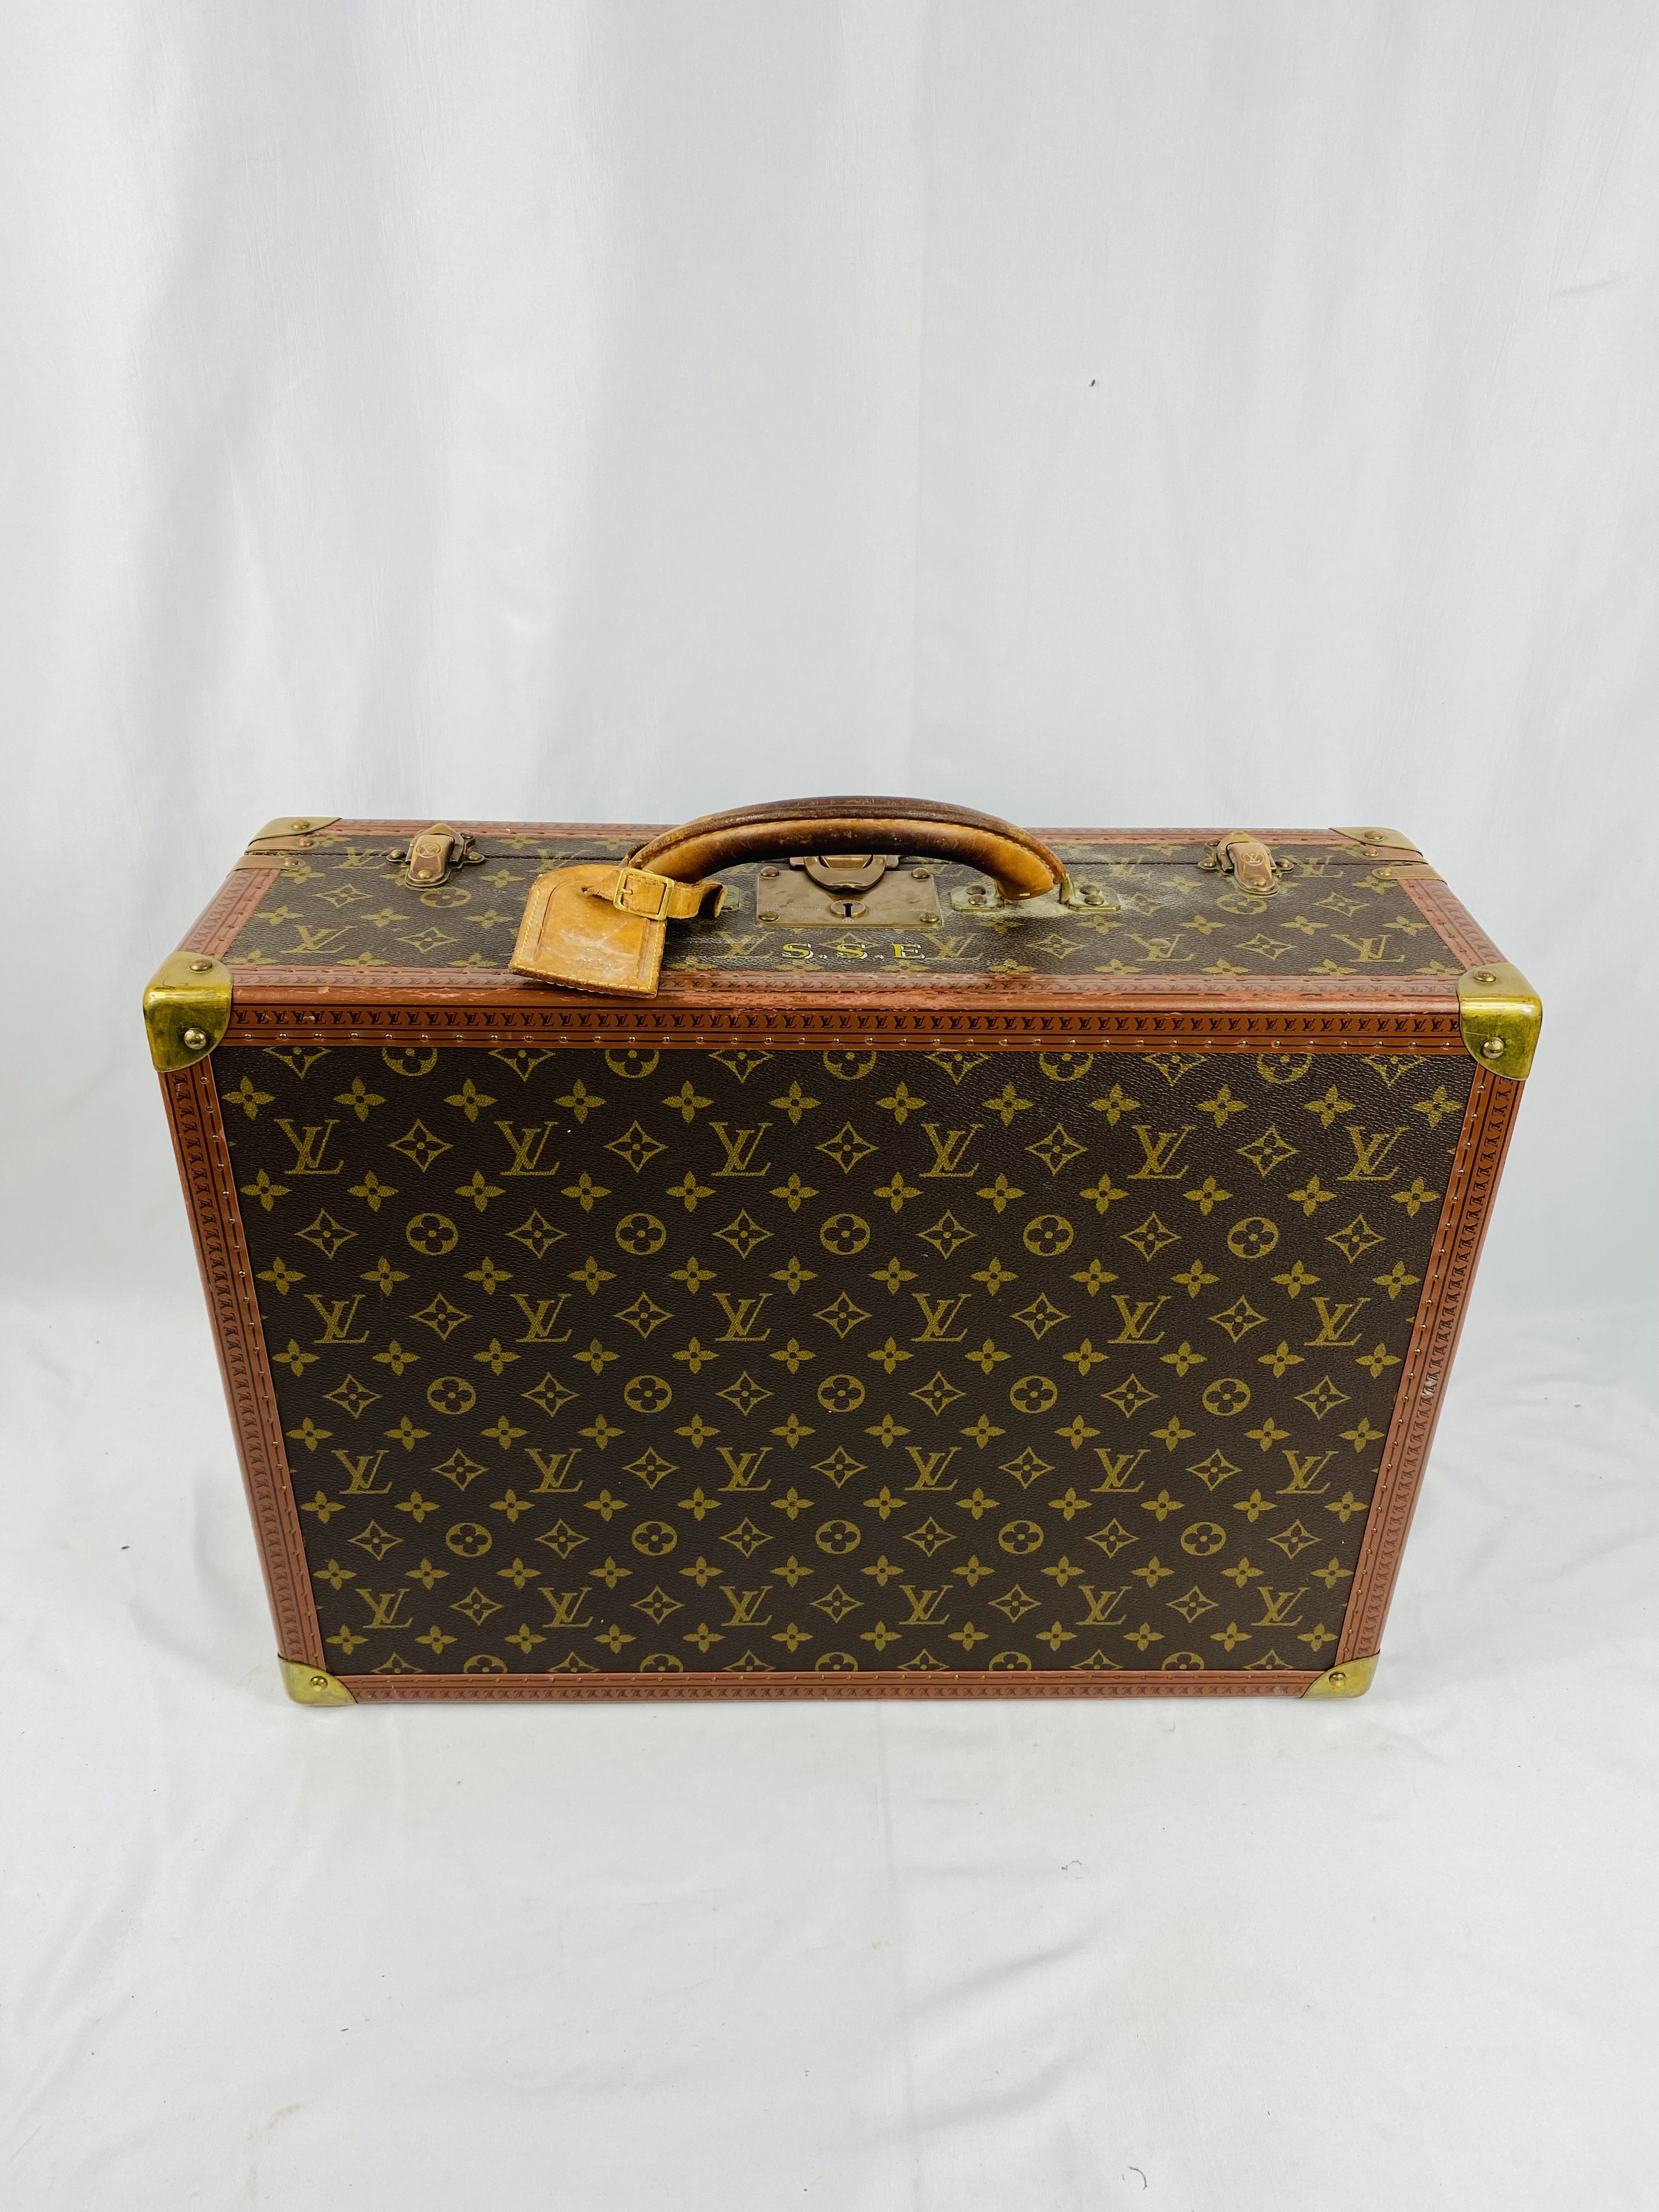 Louis Vuitton suitcase with protective cover - Image 7 of 10